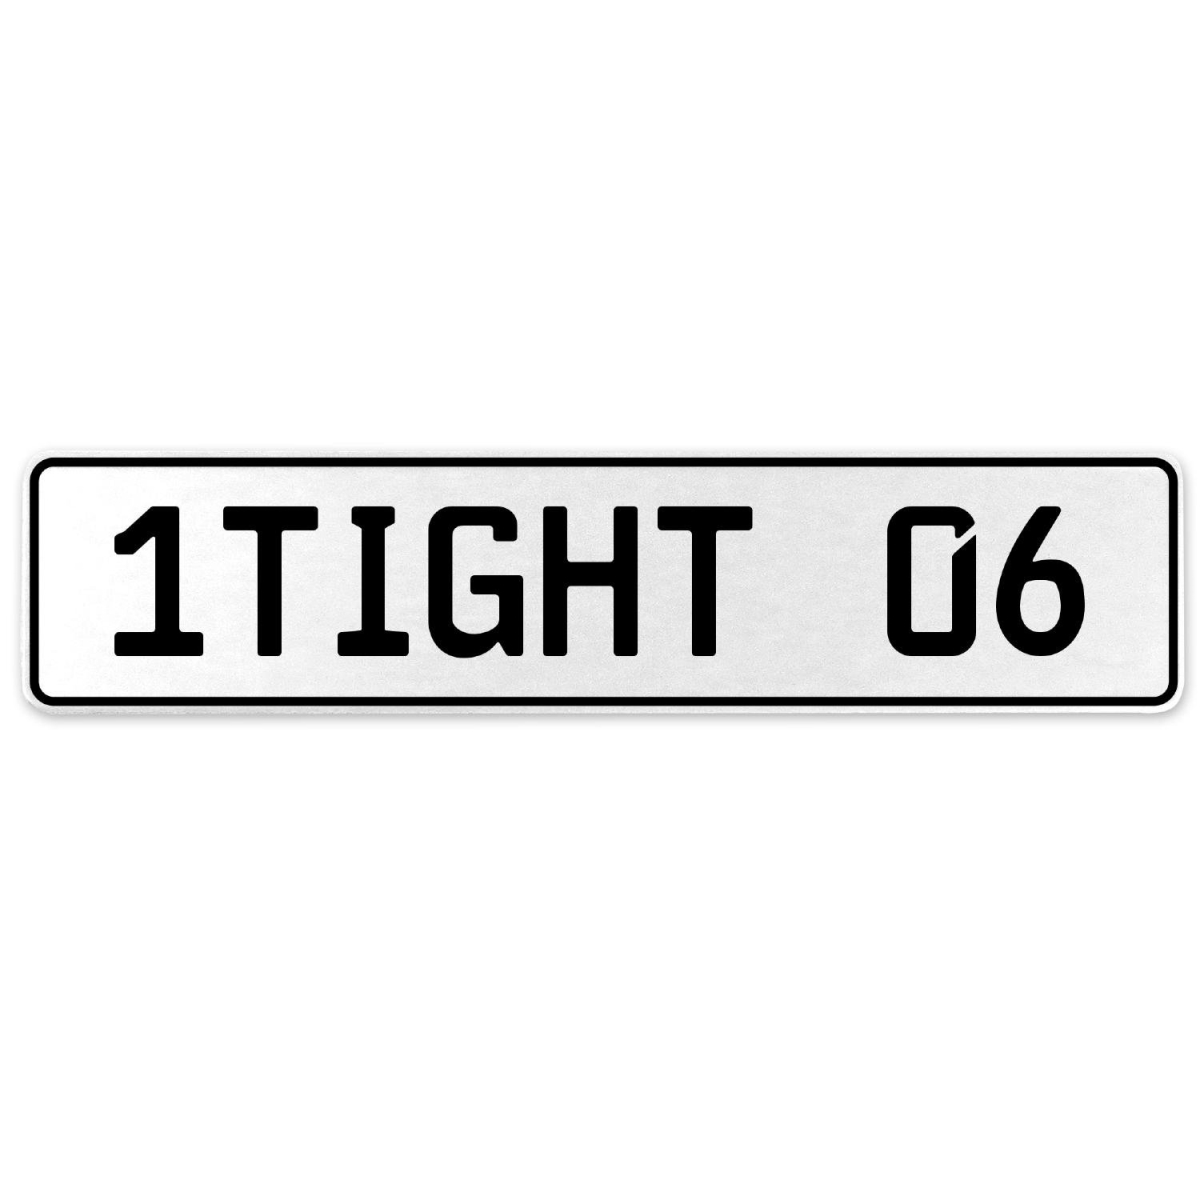 1tight 06 - White Aluminum Street Sign Mancave Euro Plate Name Door Sign Wall